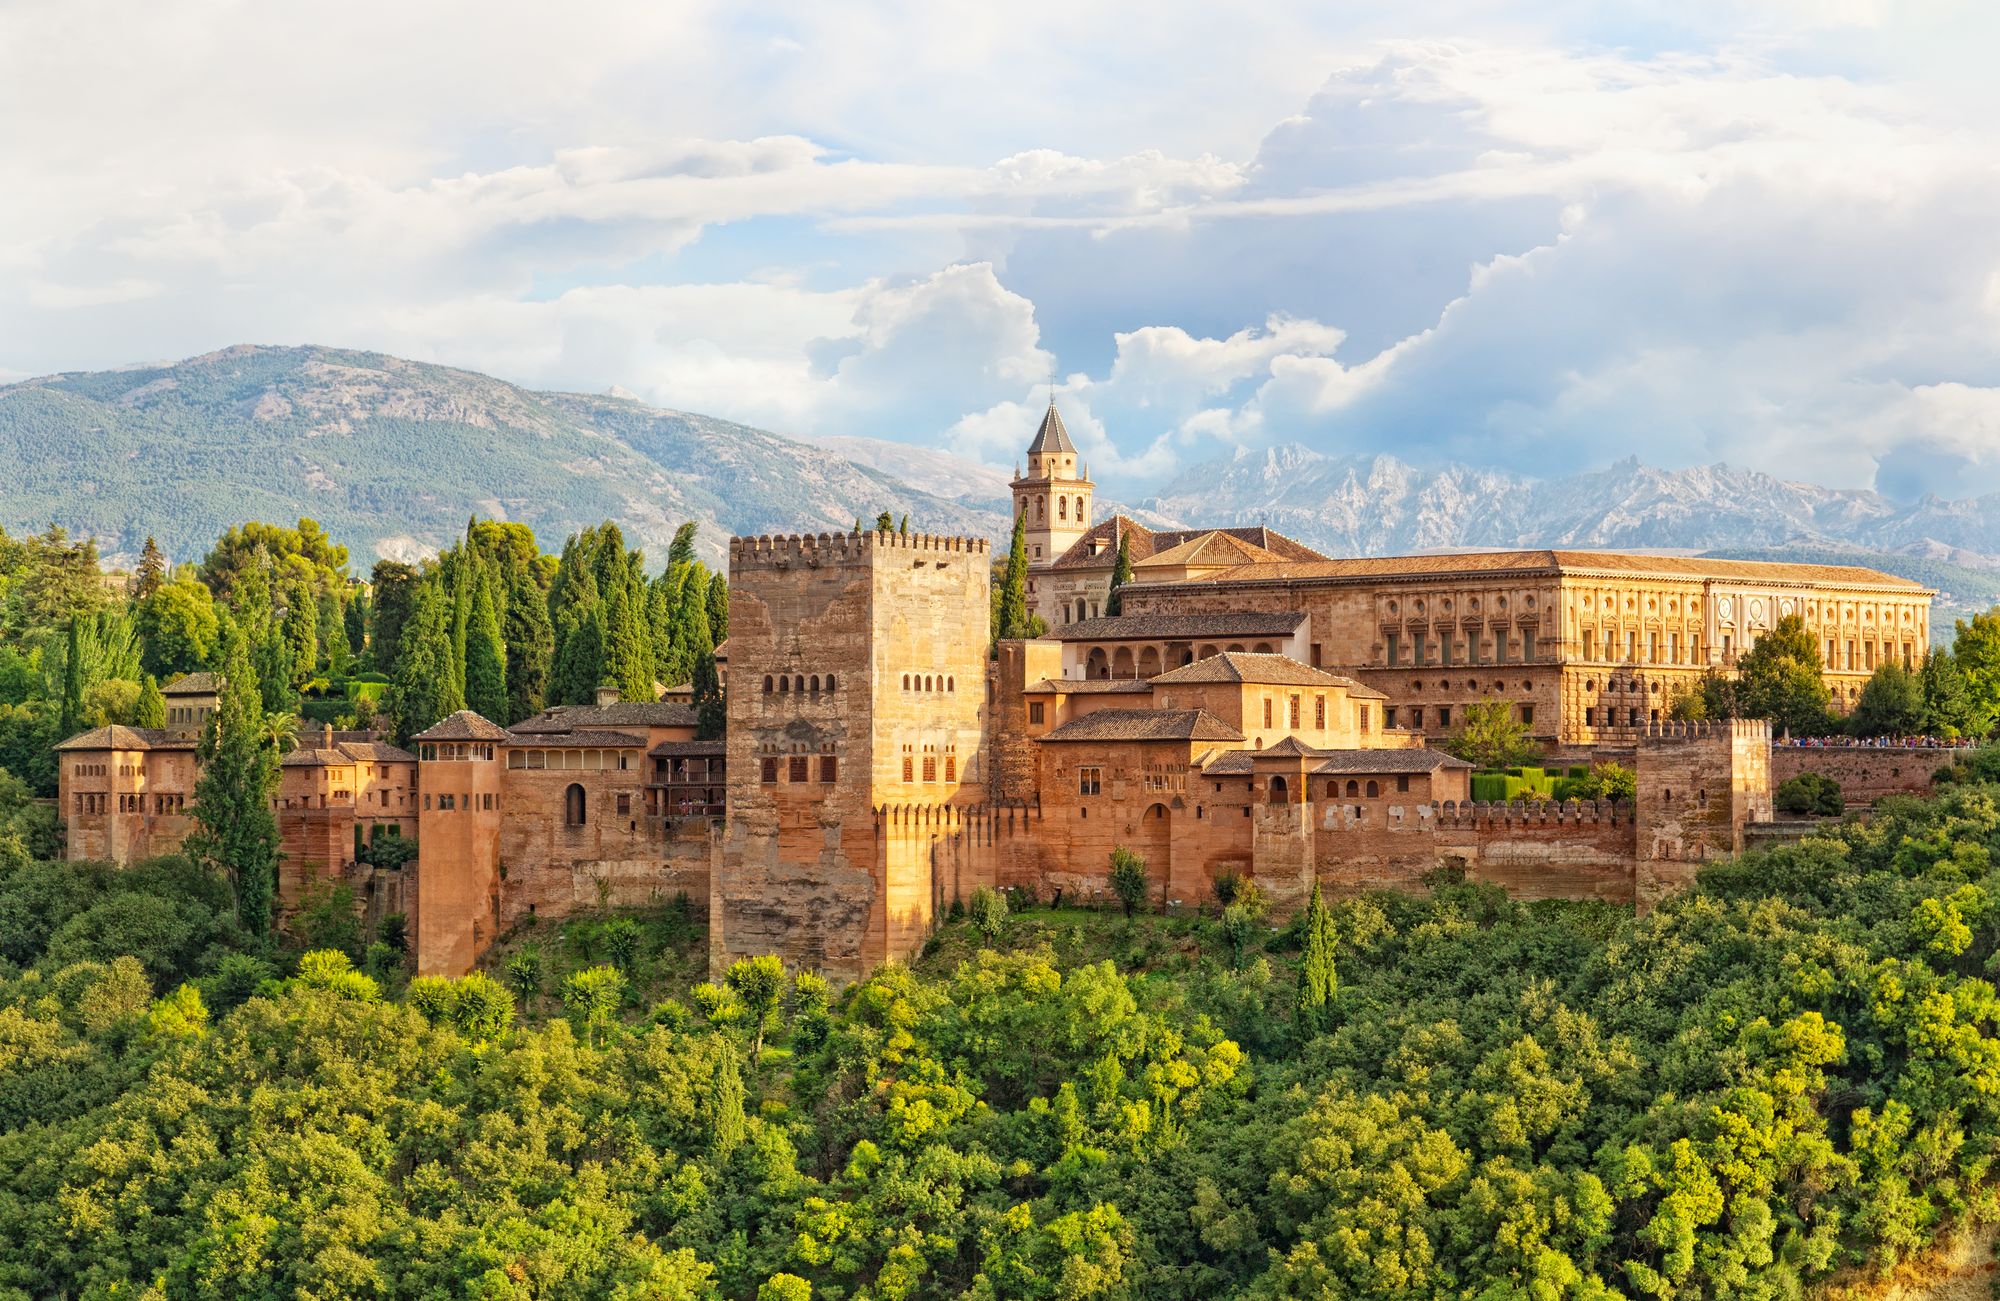 The Alhambra is the most important surviving remnant of the period of Islamic rule in Andalusia